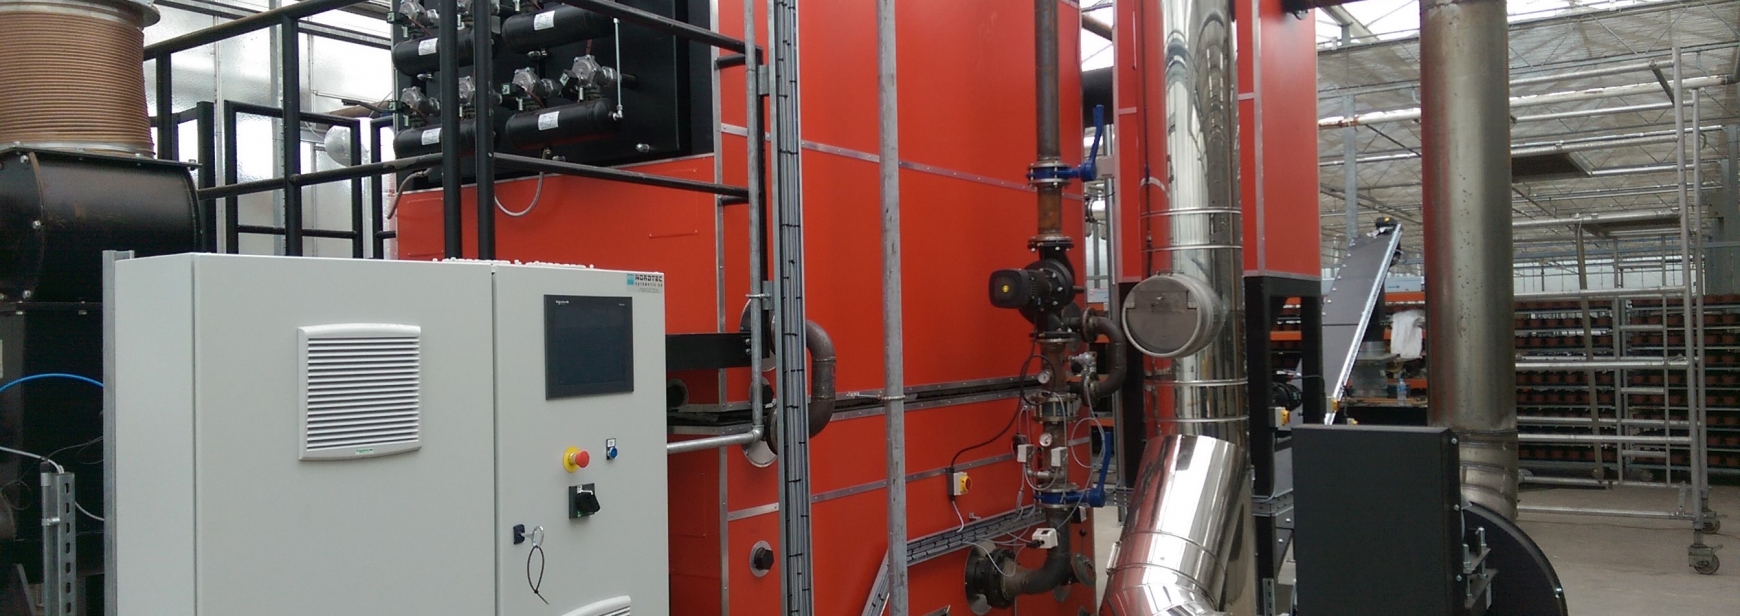 Large red biomass boiler with sliver pipes in a greenhouse